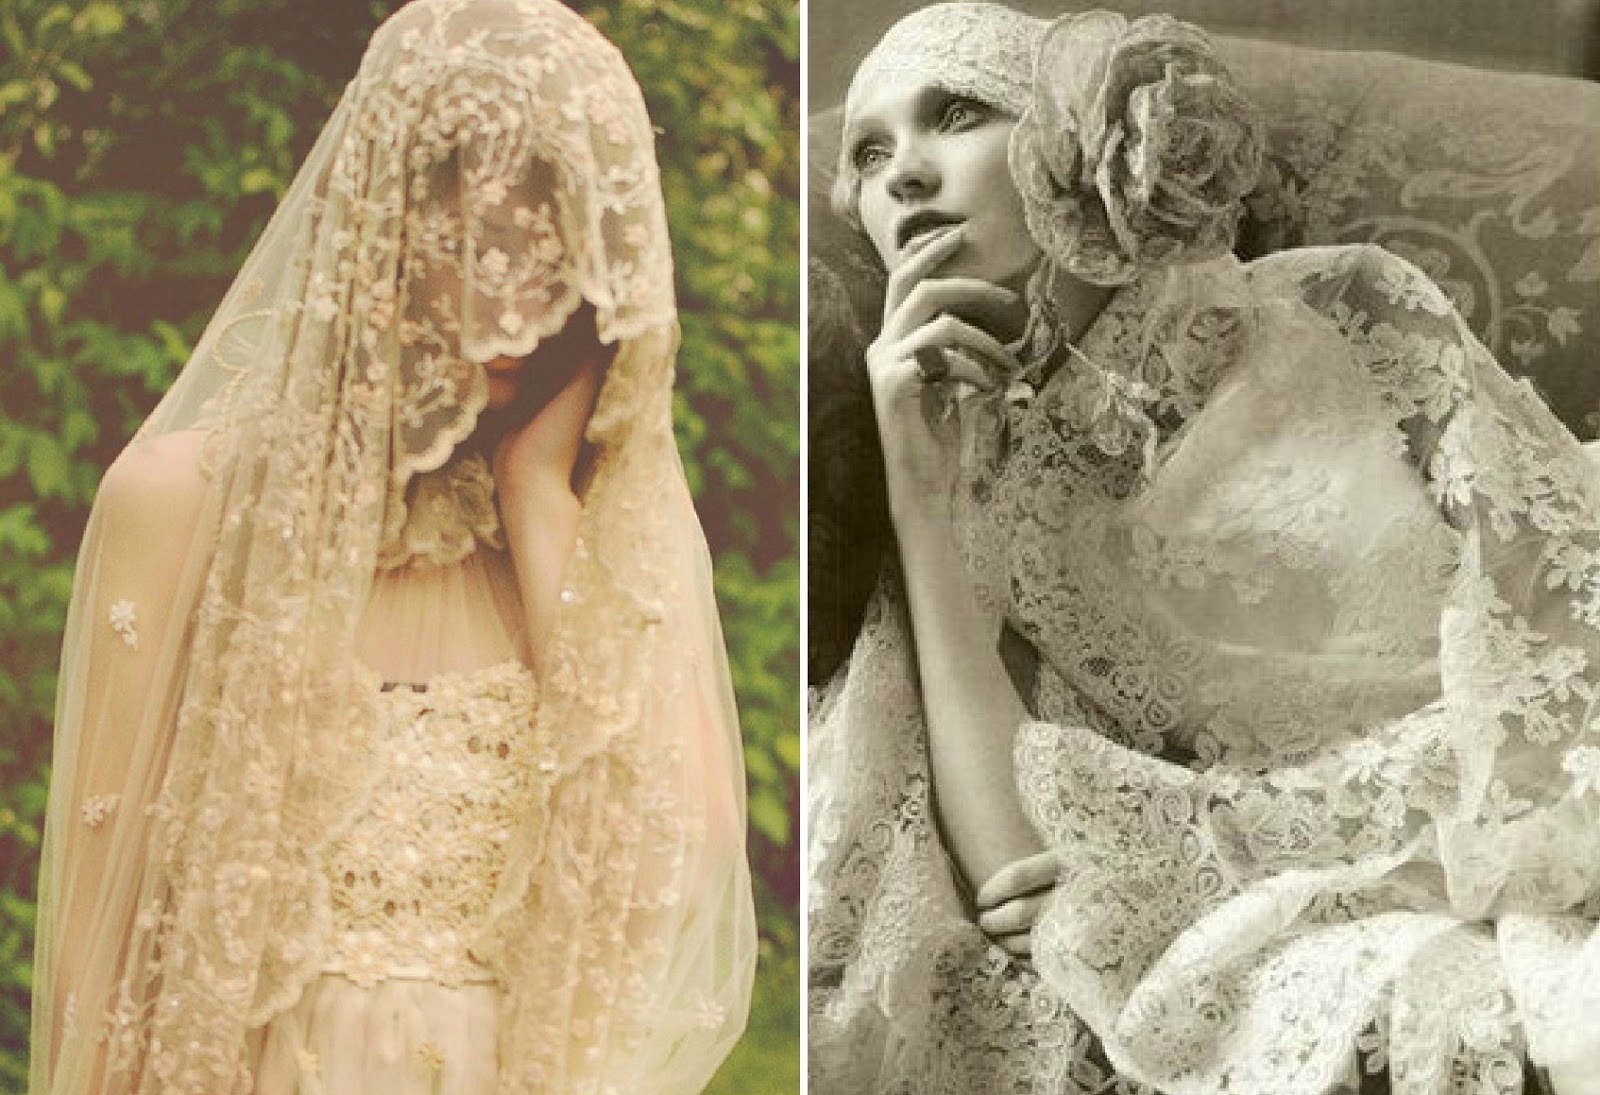 BRIDE CHIC: INCREDIBLY VEILED